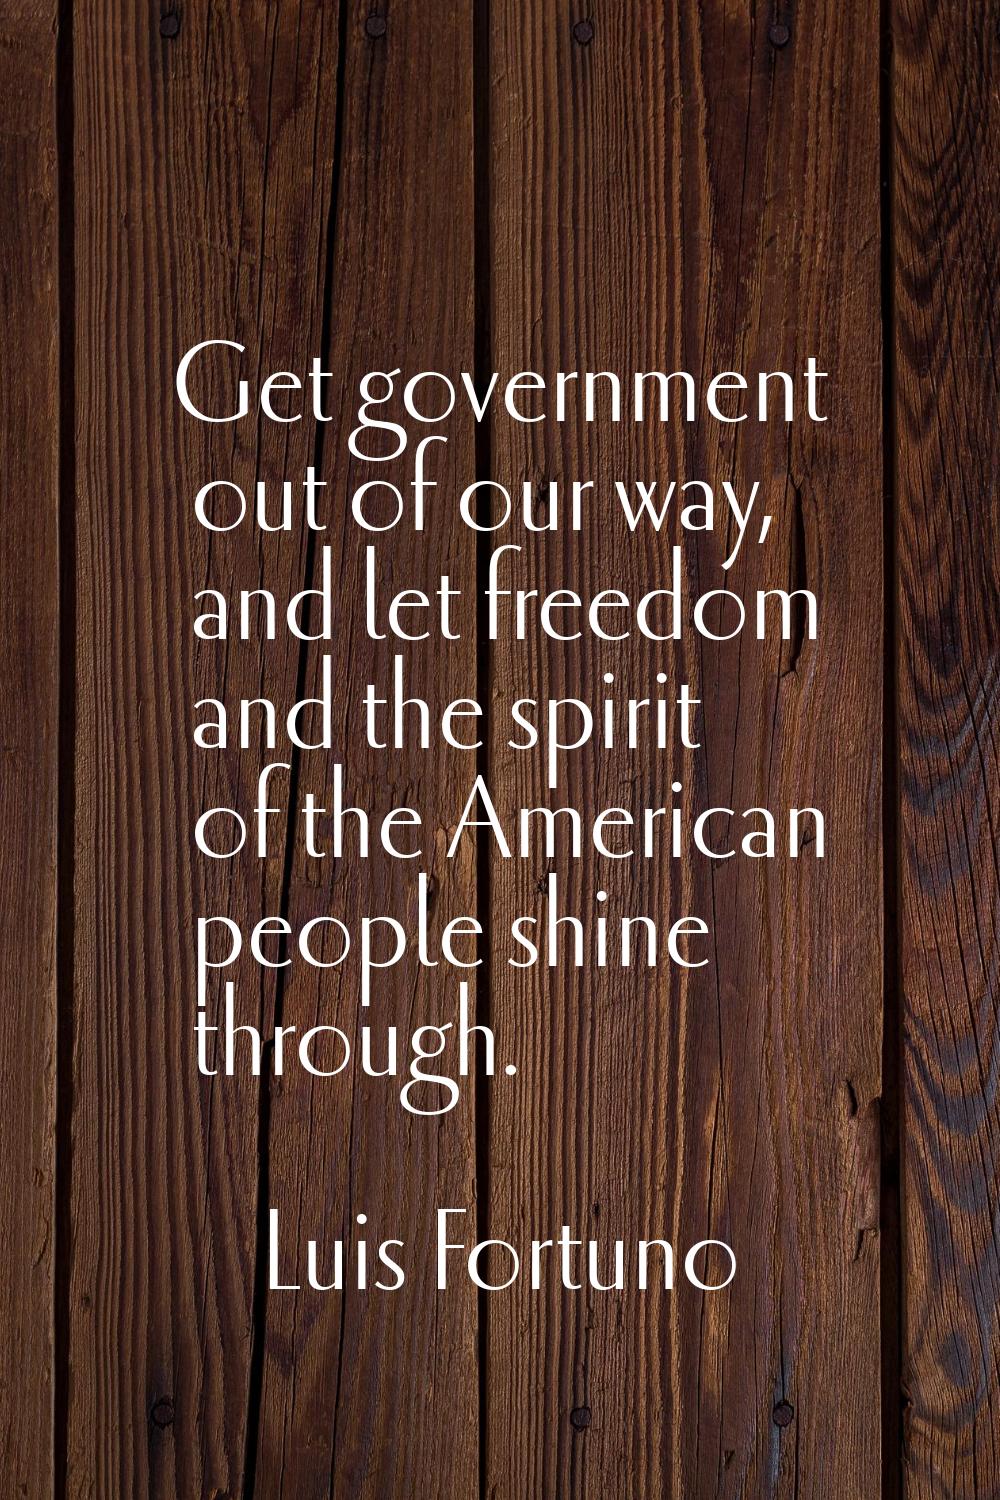 Get government out of our way, and let freedom and the spirit of the American people shine through.